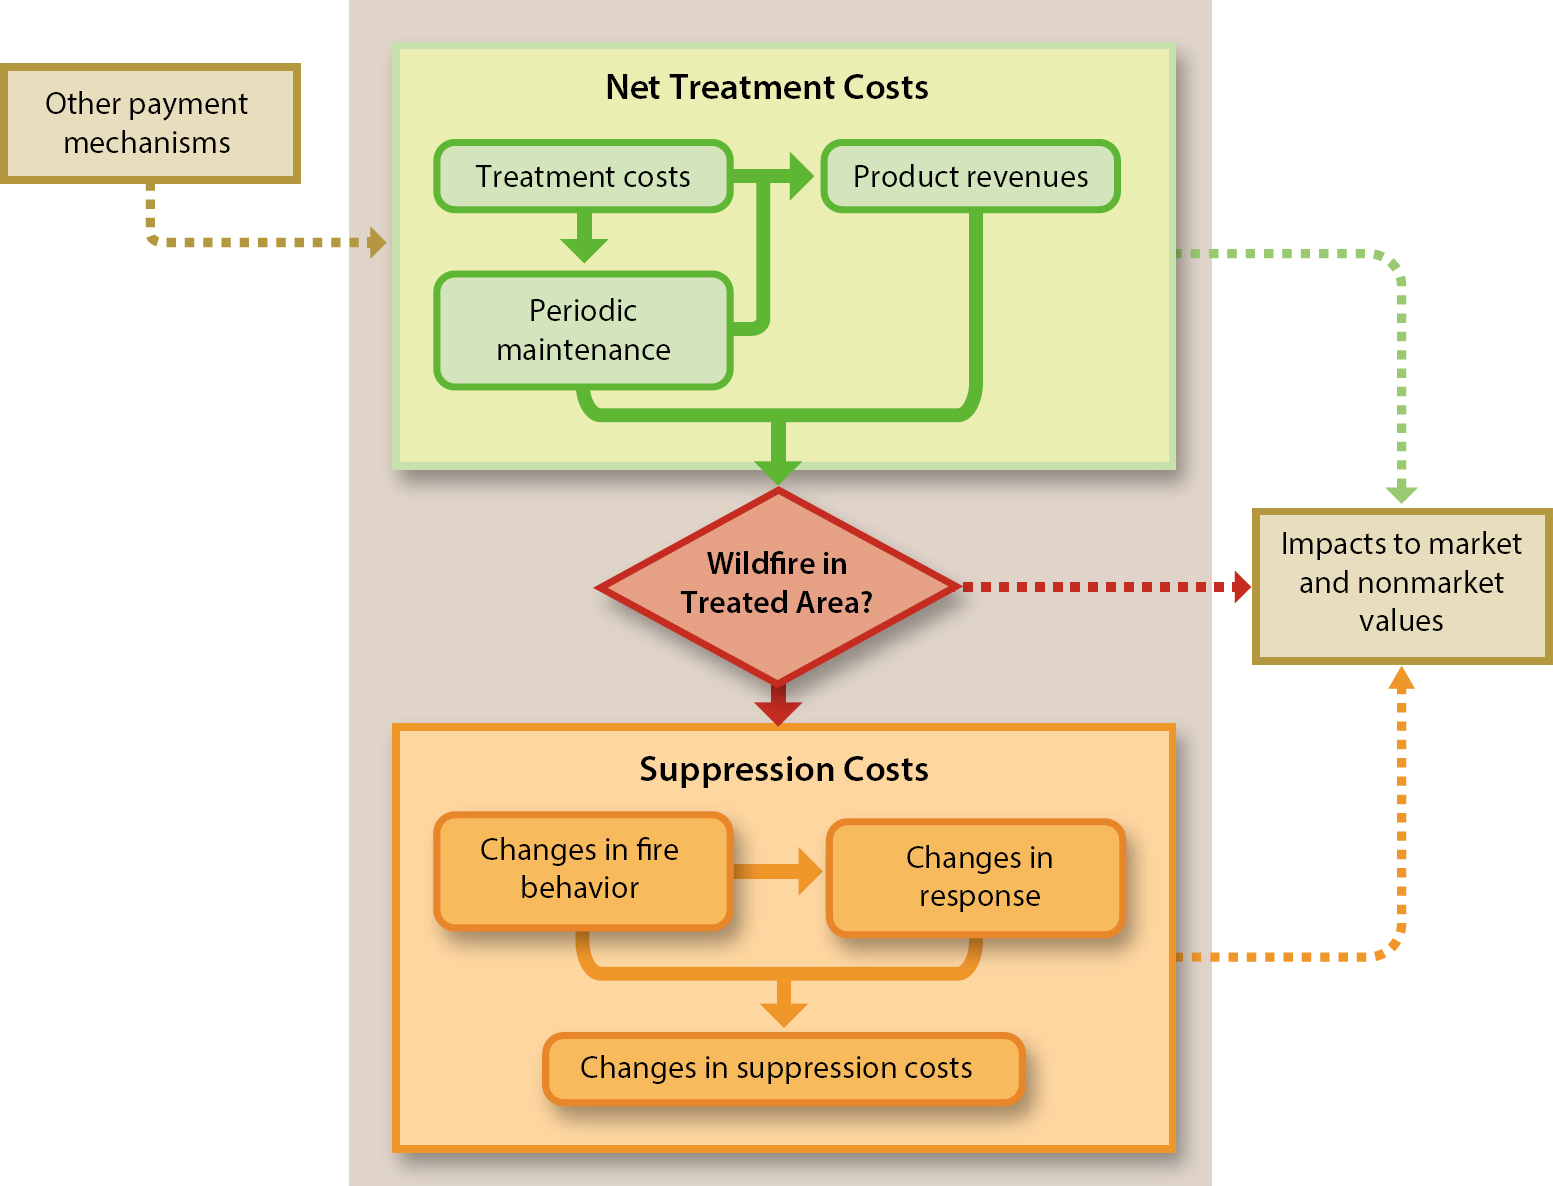 Model of the primary financial aspects of fuel treatment-wildfire interactions. Net treatment costs are a function of the direct costs of treatment and potential revenues from forest product removals. The type of treatment implemented may require subsequent maintenance treatments to maintain a low hazard state. If the treated area experiences a wildfire, then changes in suppression costs (relative to an untreated landscape) may occur.